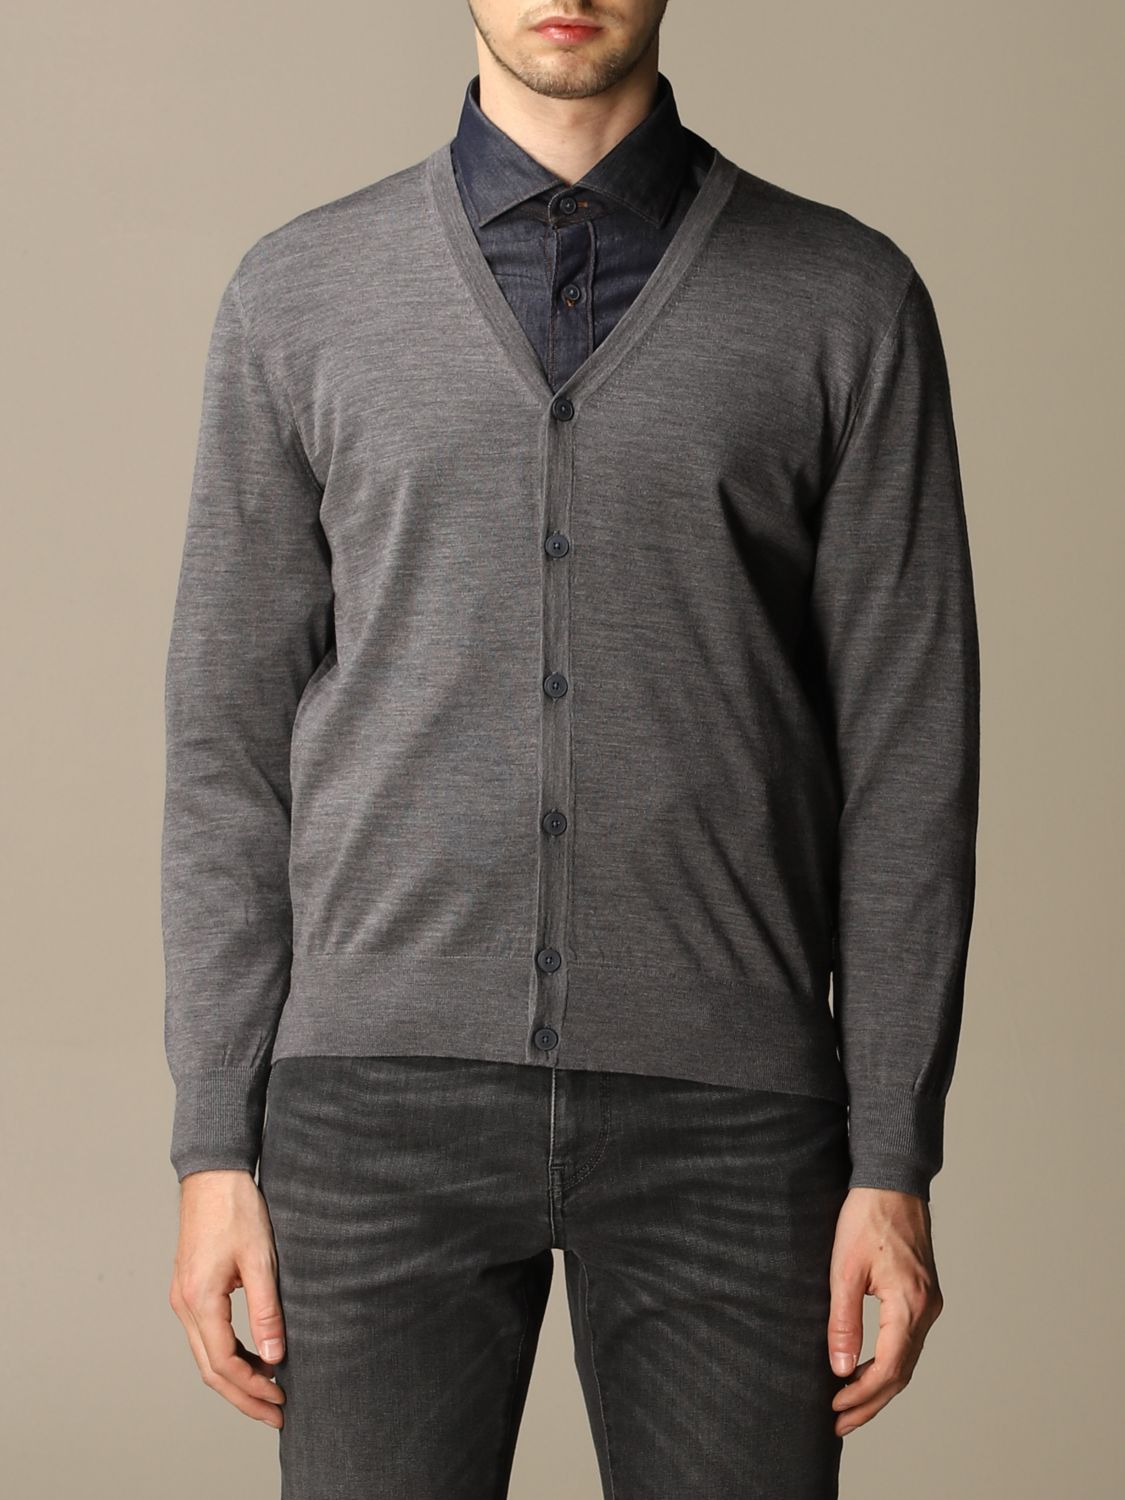 Z Zegna Outlet: cardigan in pure Merinos wool with long sleeves ...